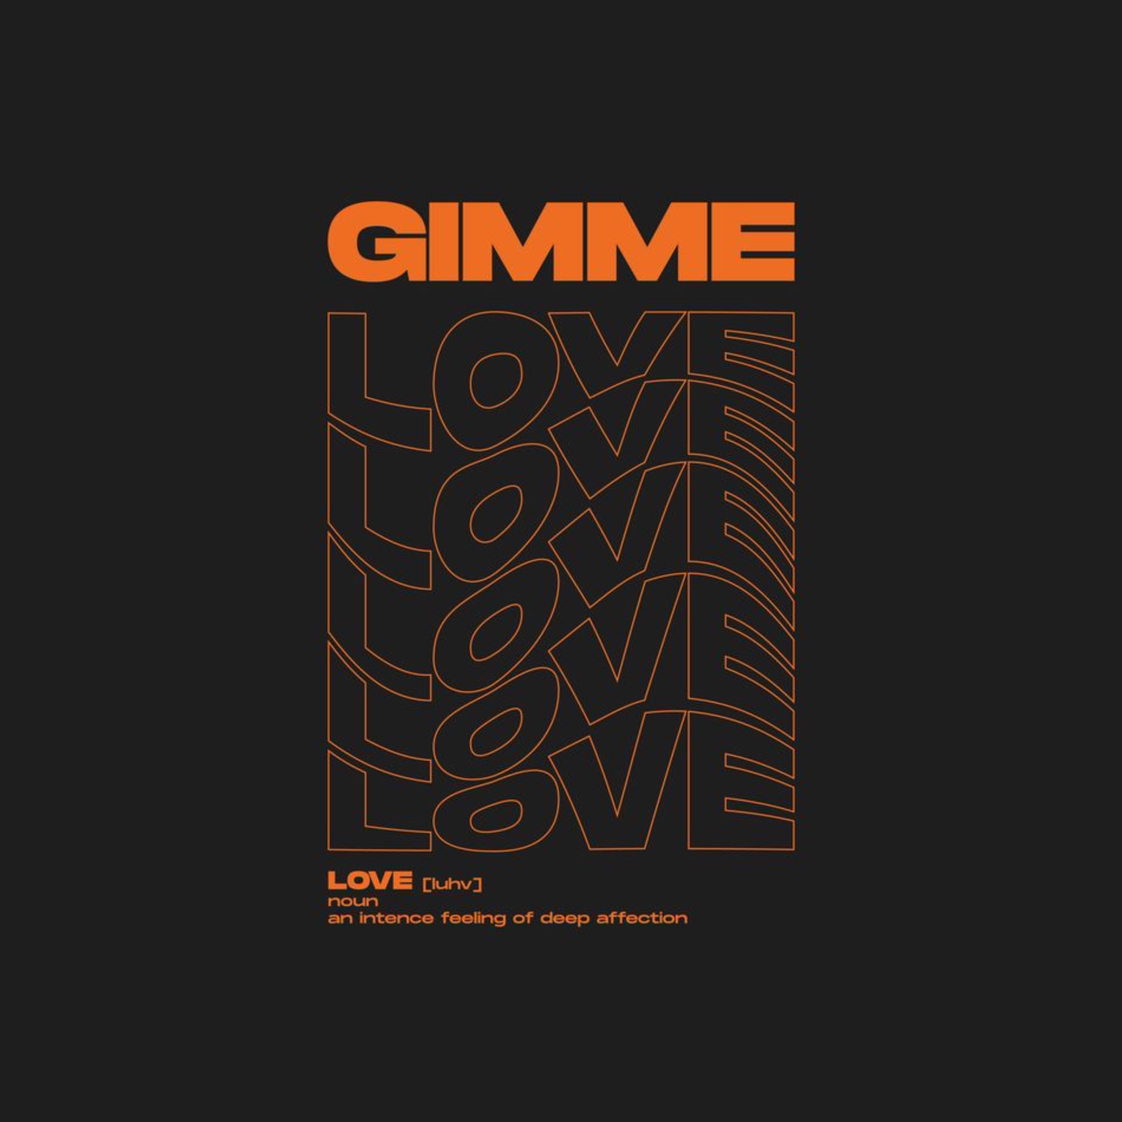 Download GIMME LOVE